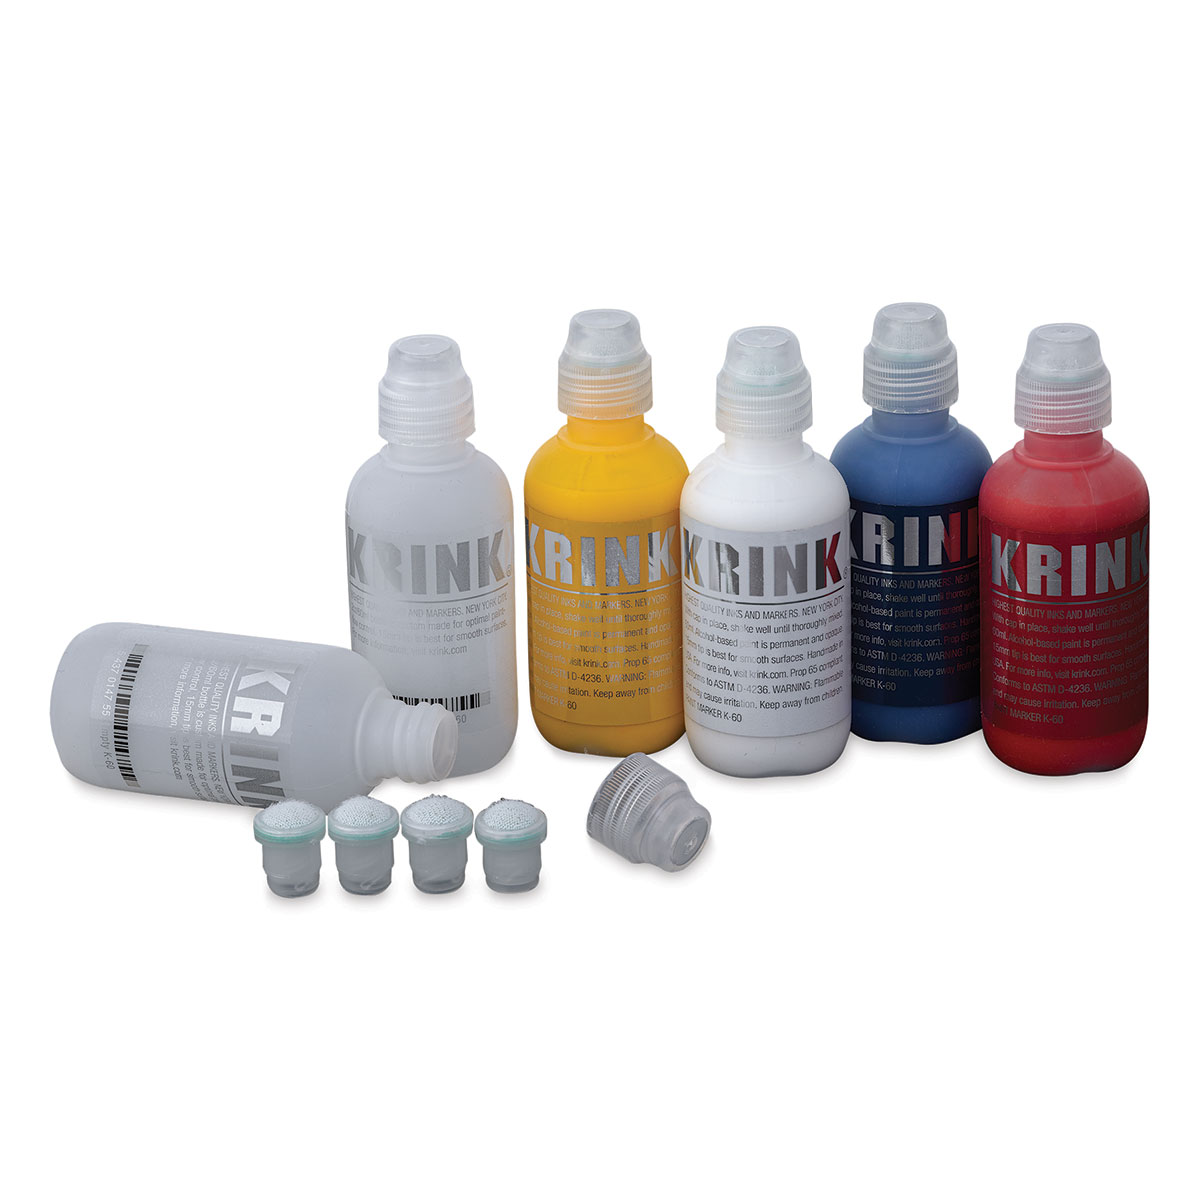 Krink Alcohol Paint Marker Silver Box Set of 4